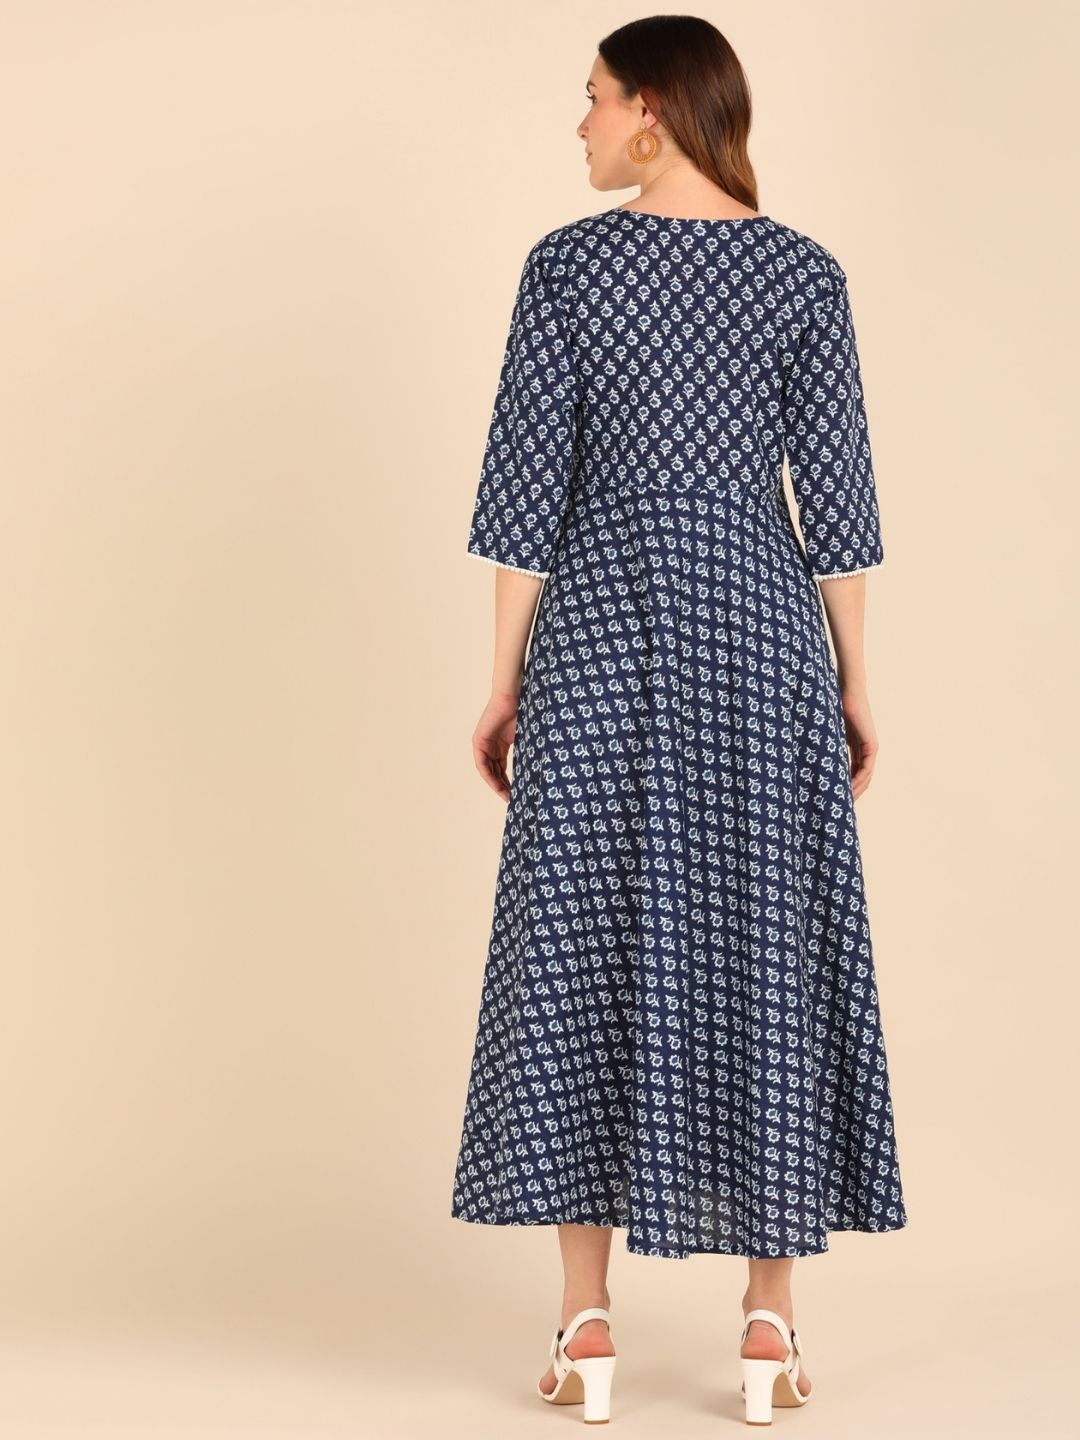 Indigo Printed Fit & Flare Ankle Length Dress